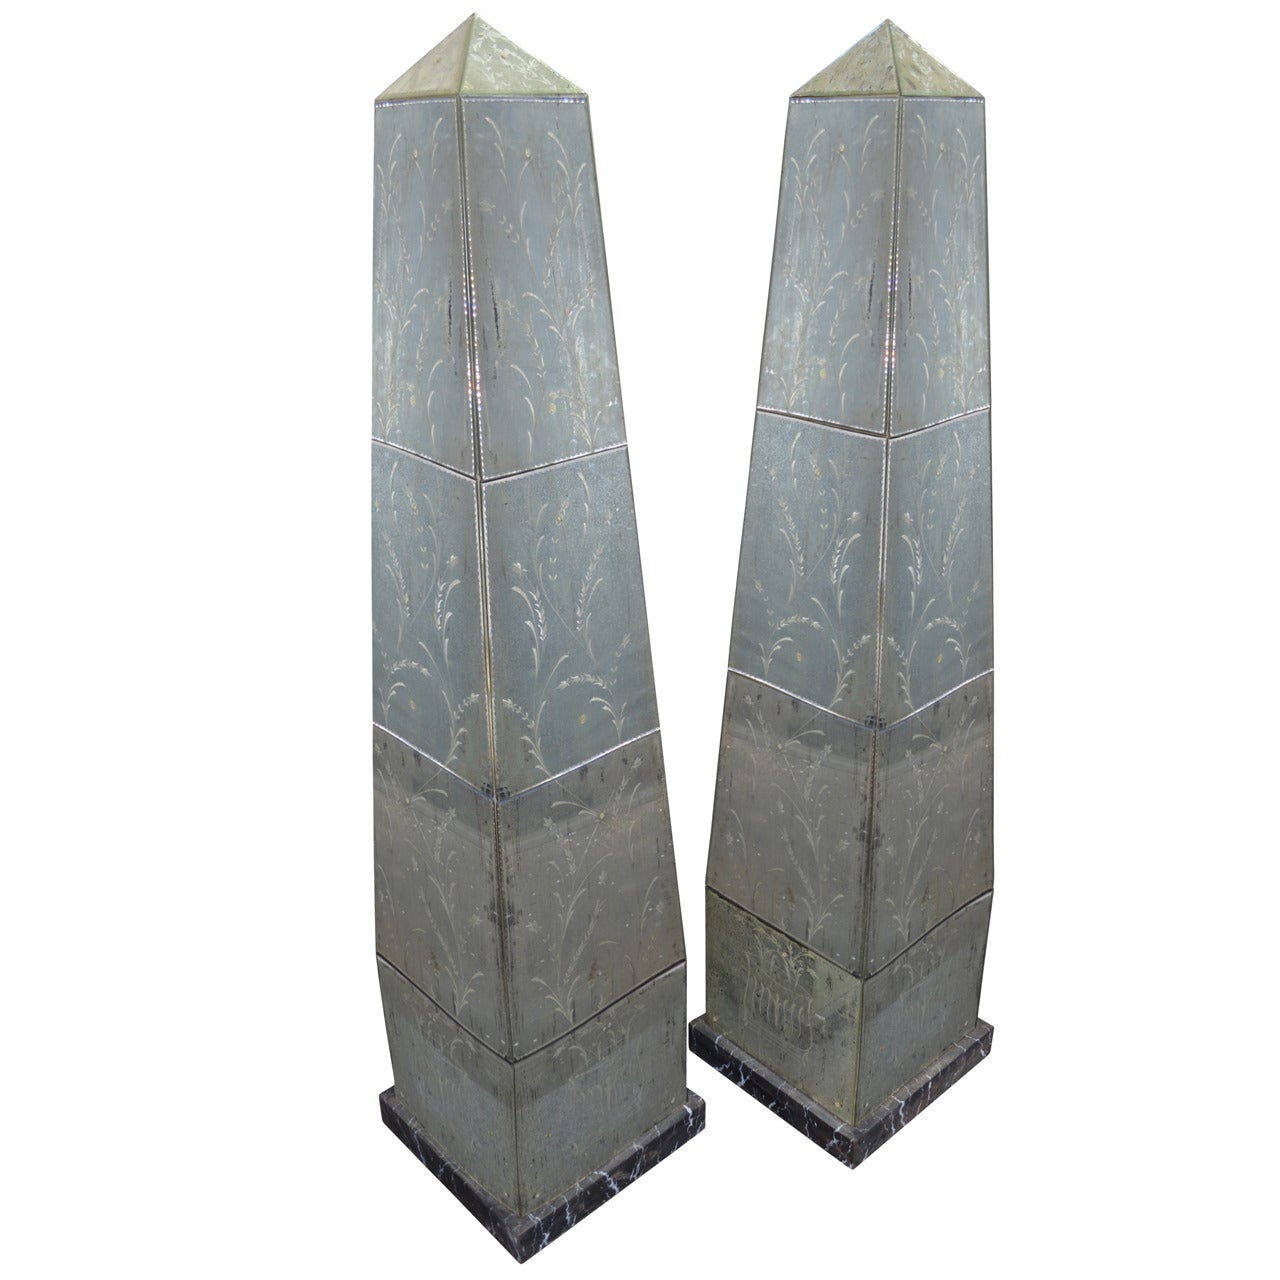 Pair of Large Mirrored Glass Obelisks